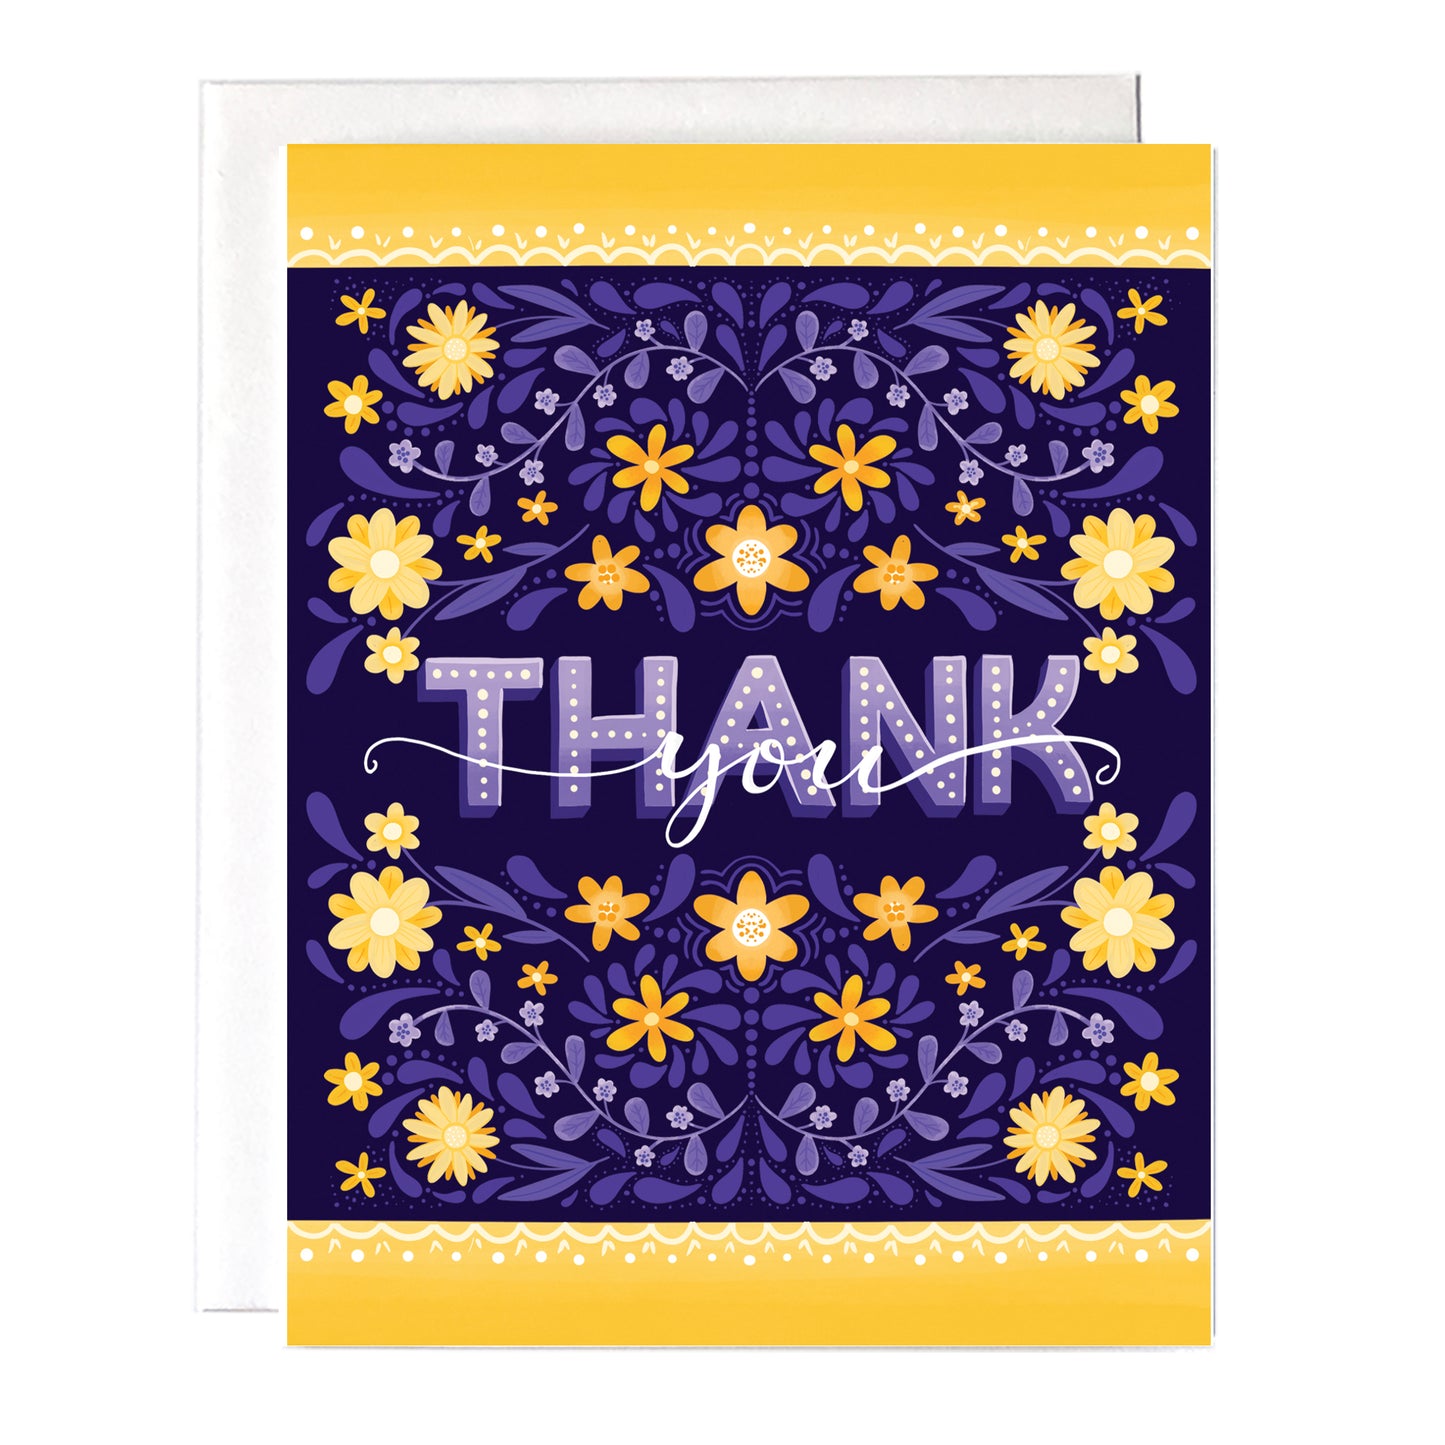 A pretty purple and yellow floral thank you card